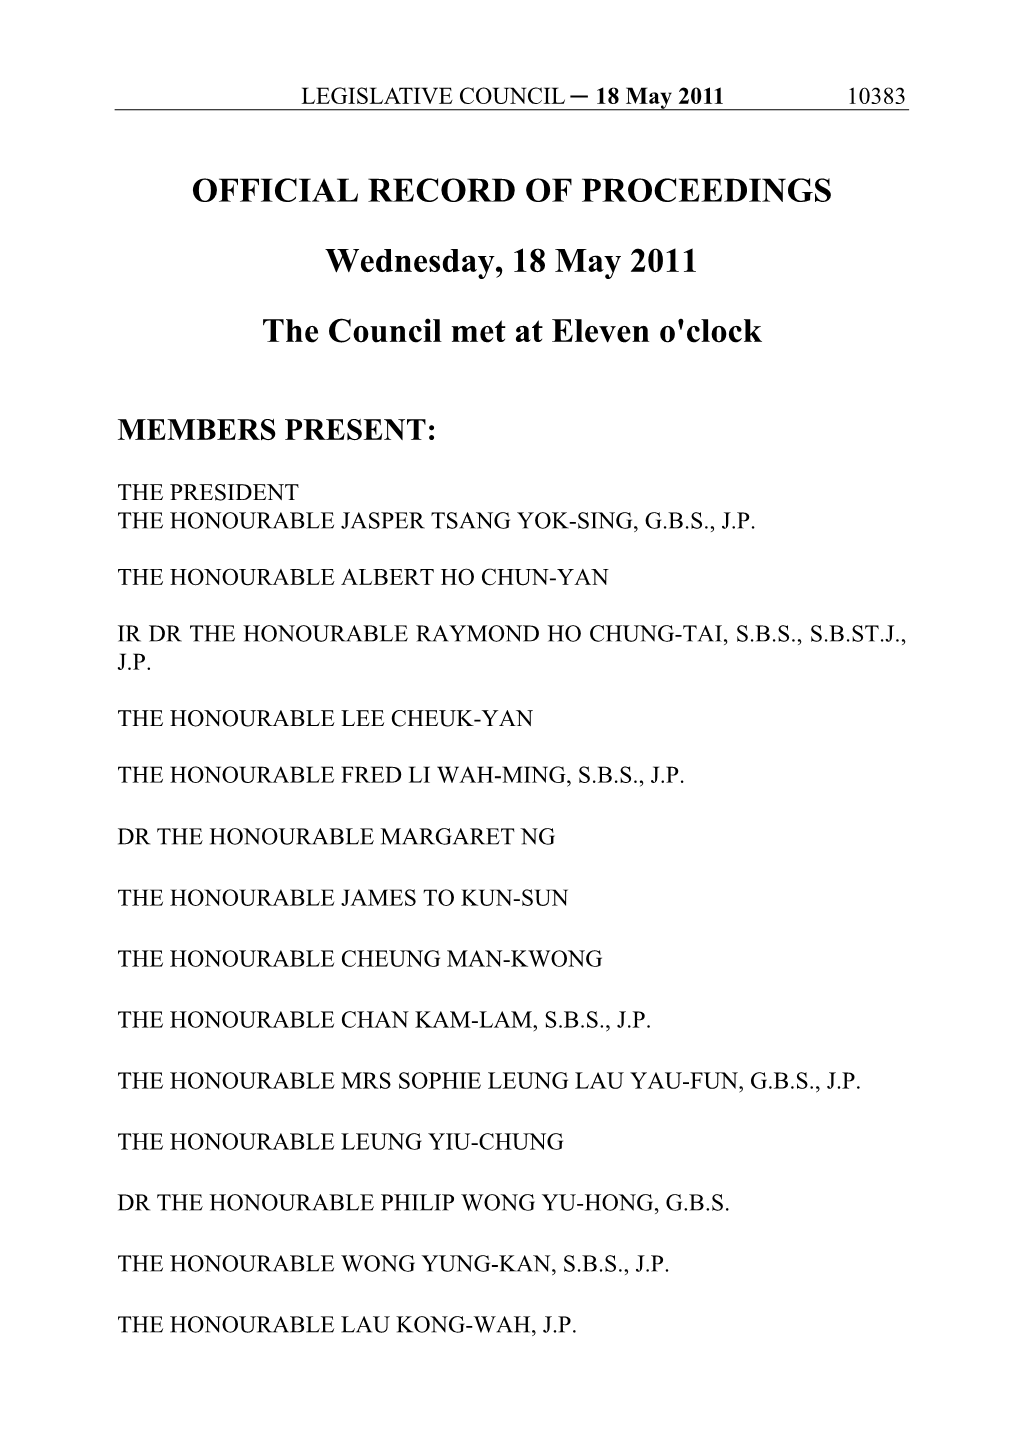 OFFICIAL RECORD of PROCEEDINGS Wednesday, 18 May 2011 the Council Met at Eleven O'clock